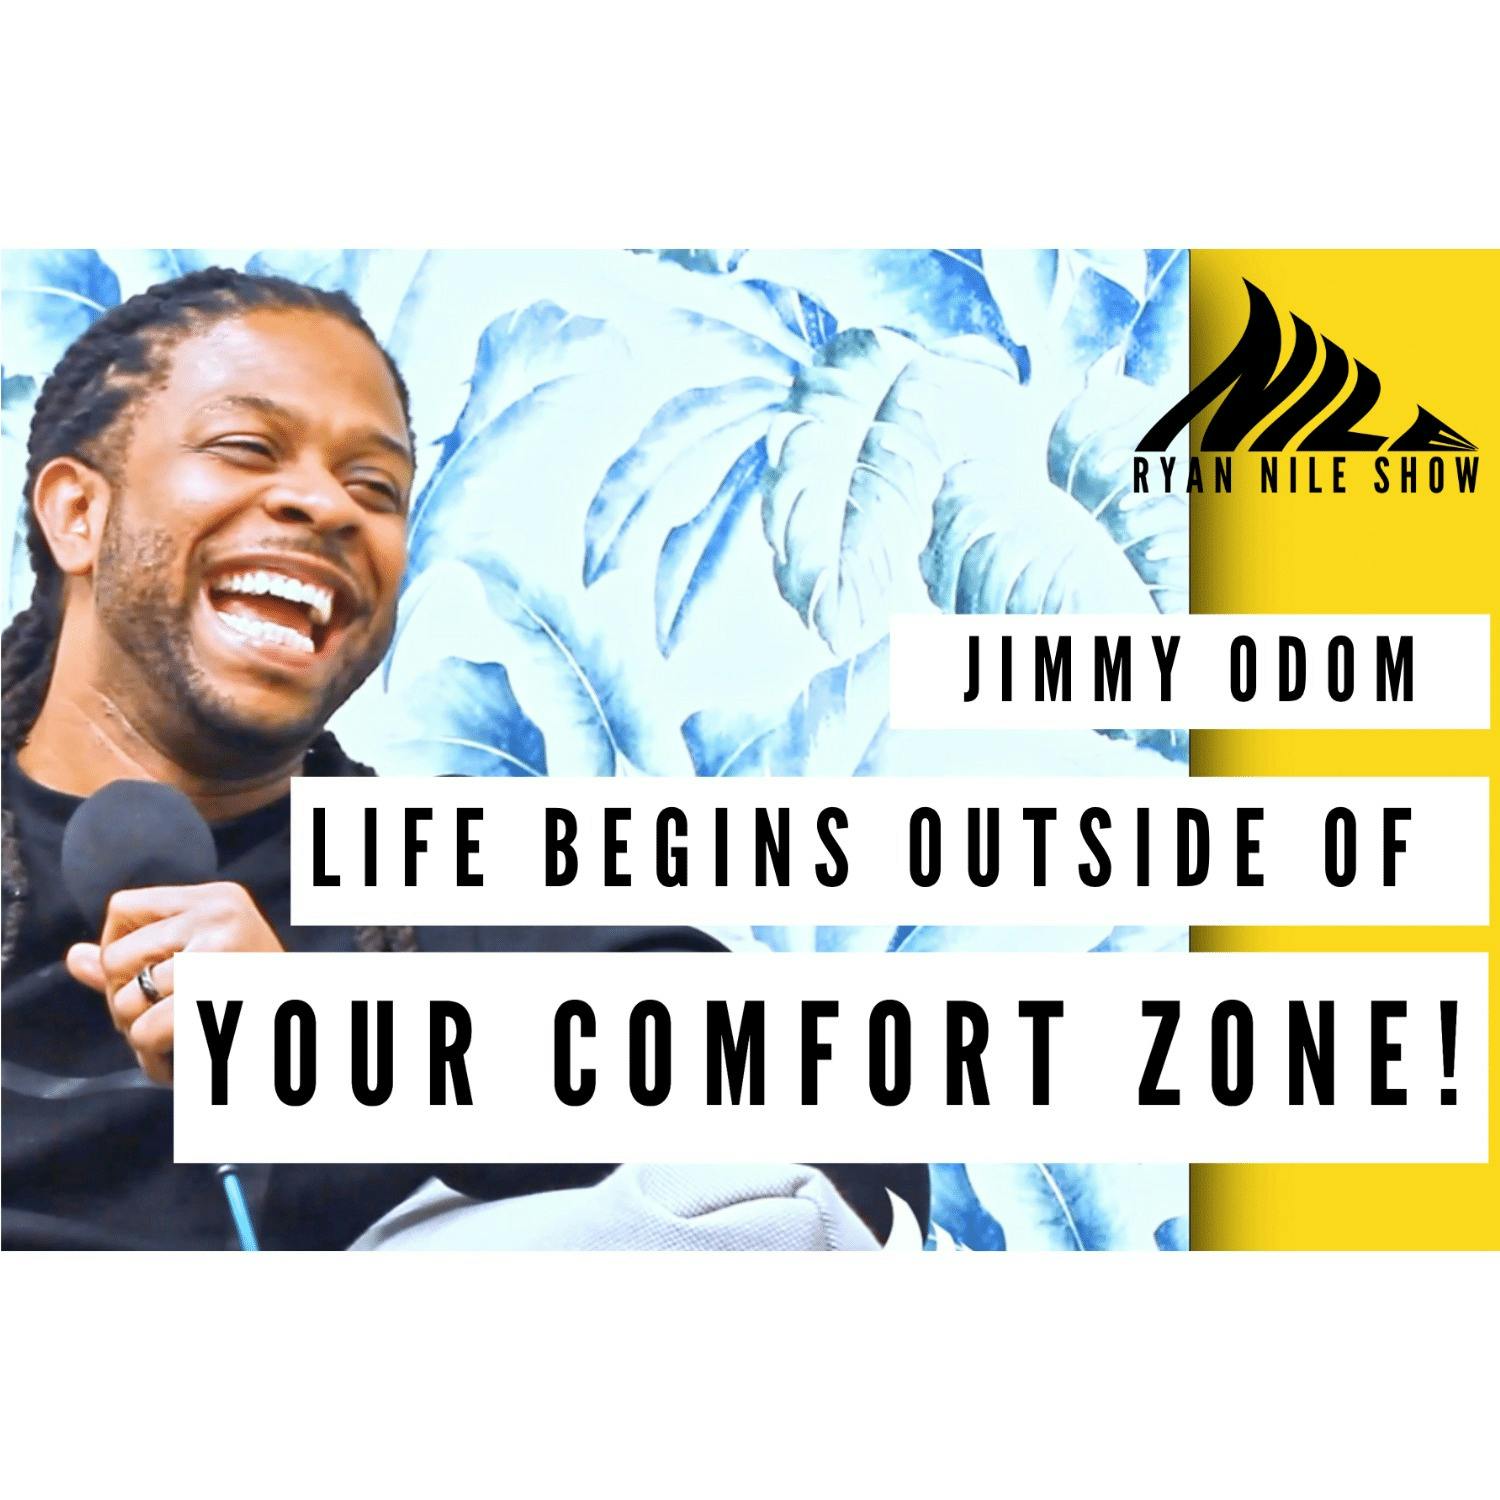 Jimmy Odom - Life Begins Outside of Your Comfort Zone!